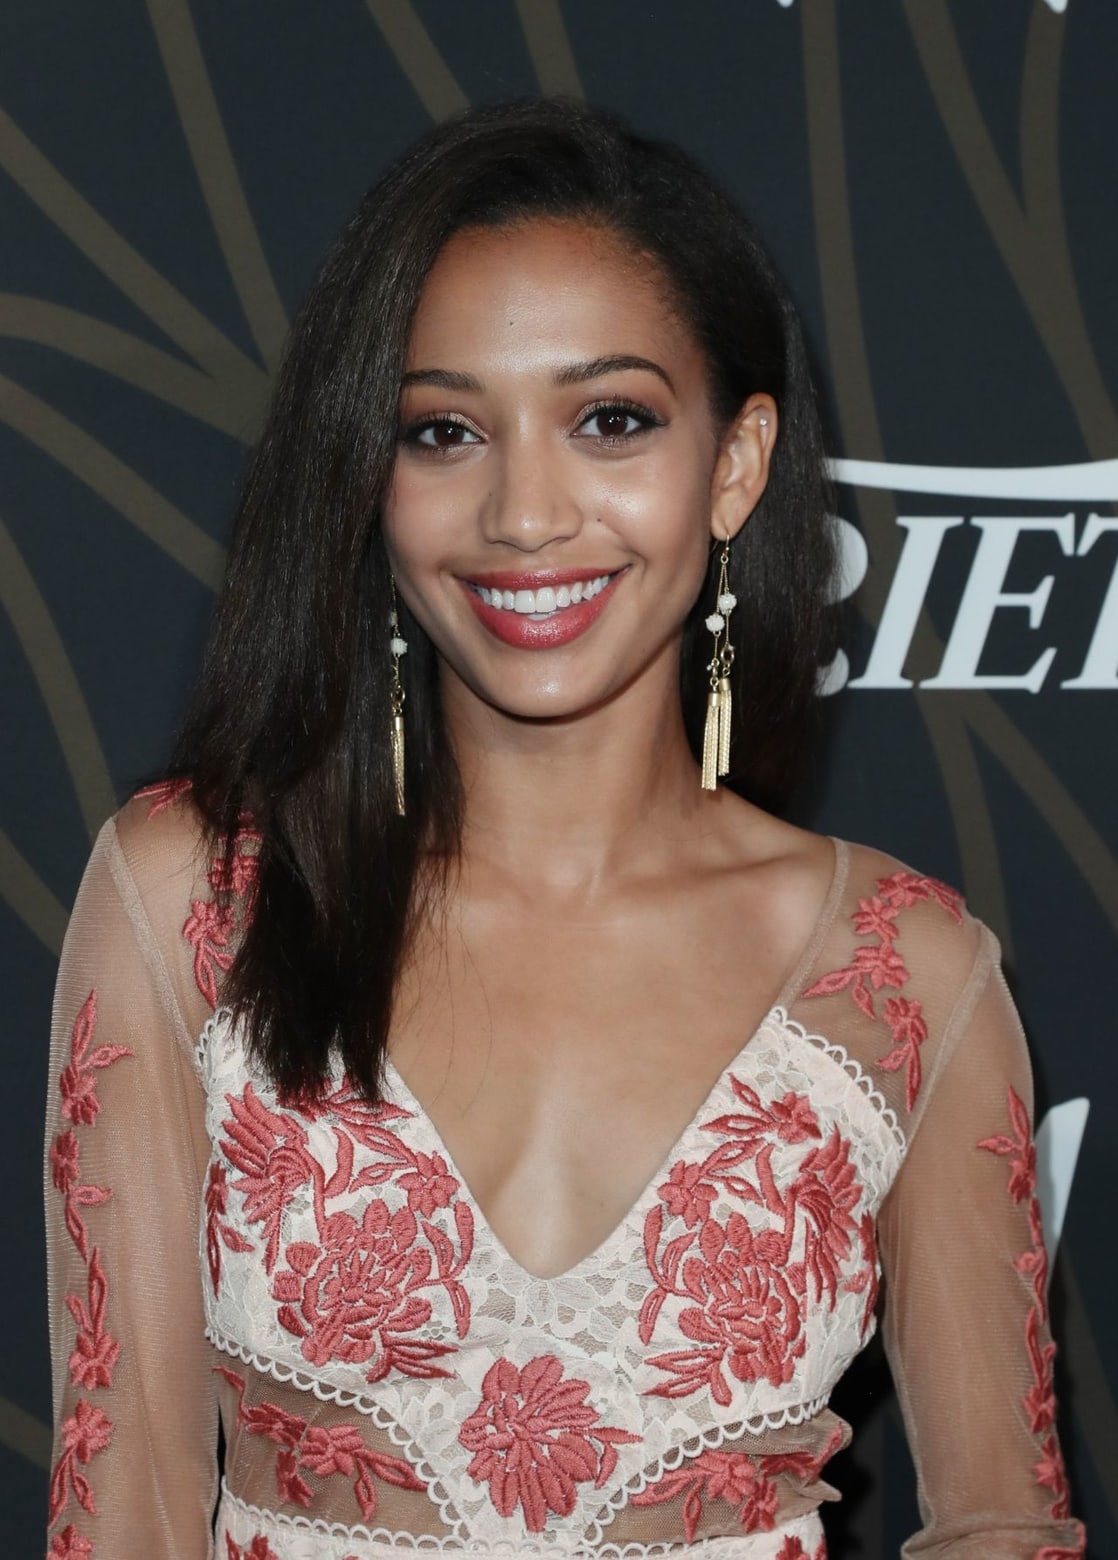 Samantha Logan - Best 10 young Black actresses under 25 to watch in 2022